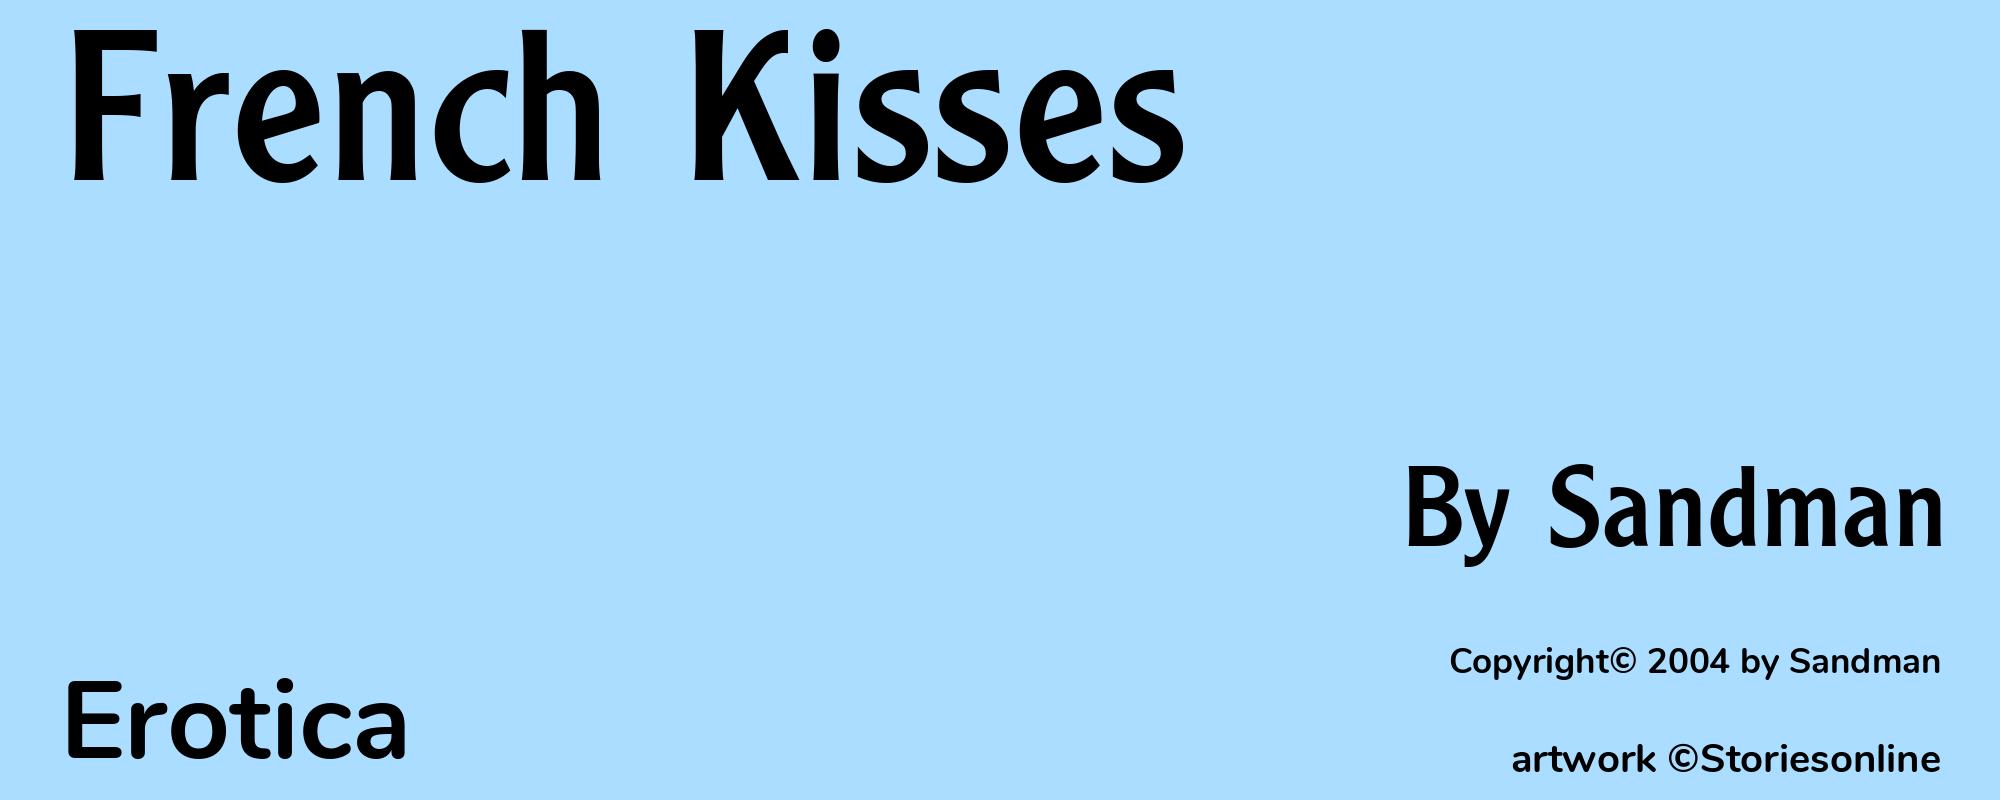 French Kisses - Cover